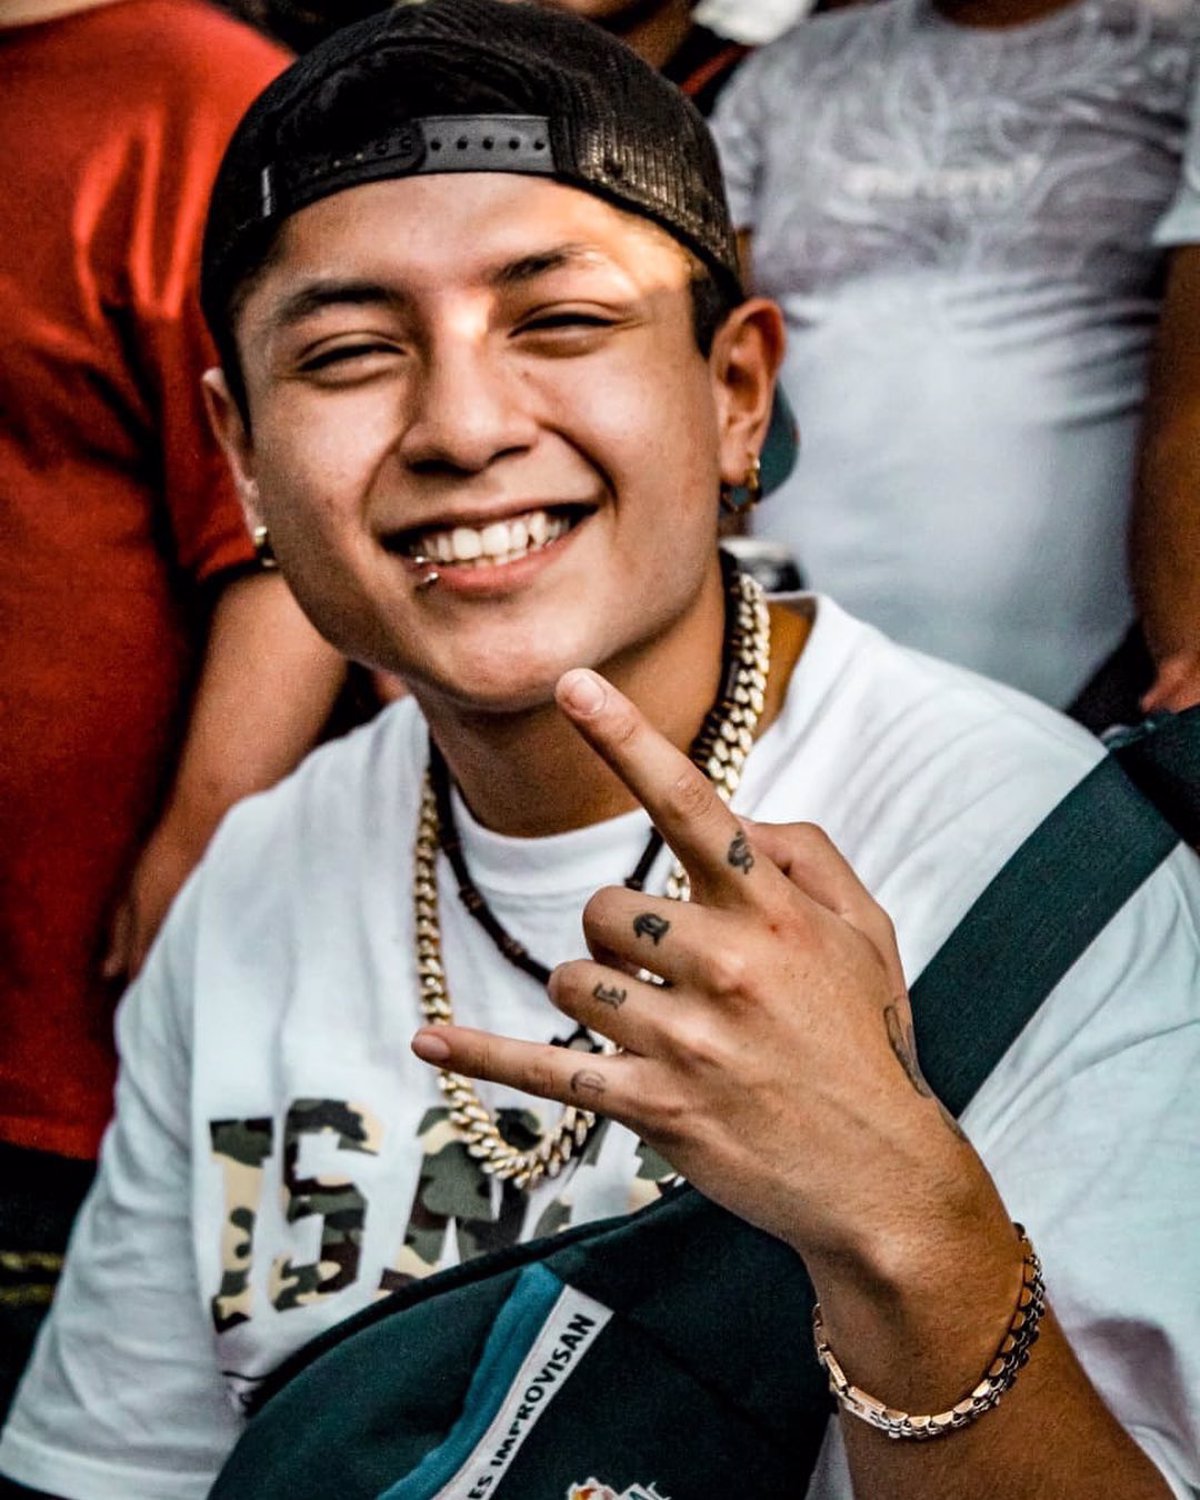 24-Year-Old Mexican Rapper Majestic, Red Bull Mexico 2023 Runner-Up, Tragically Drowns